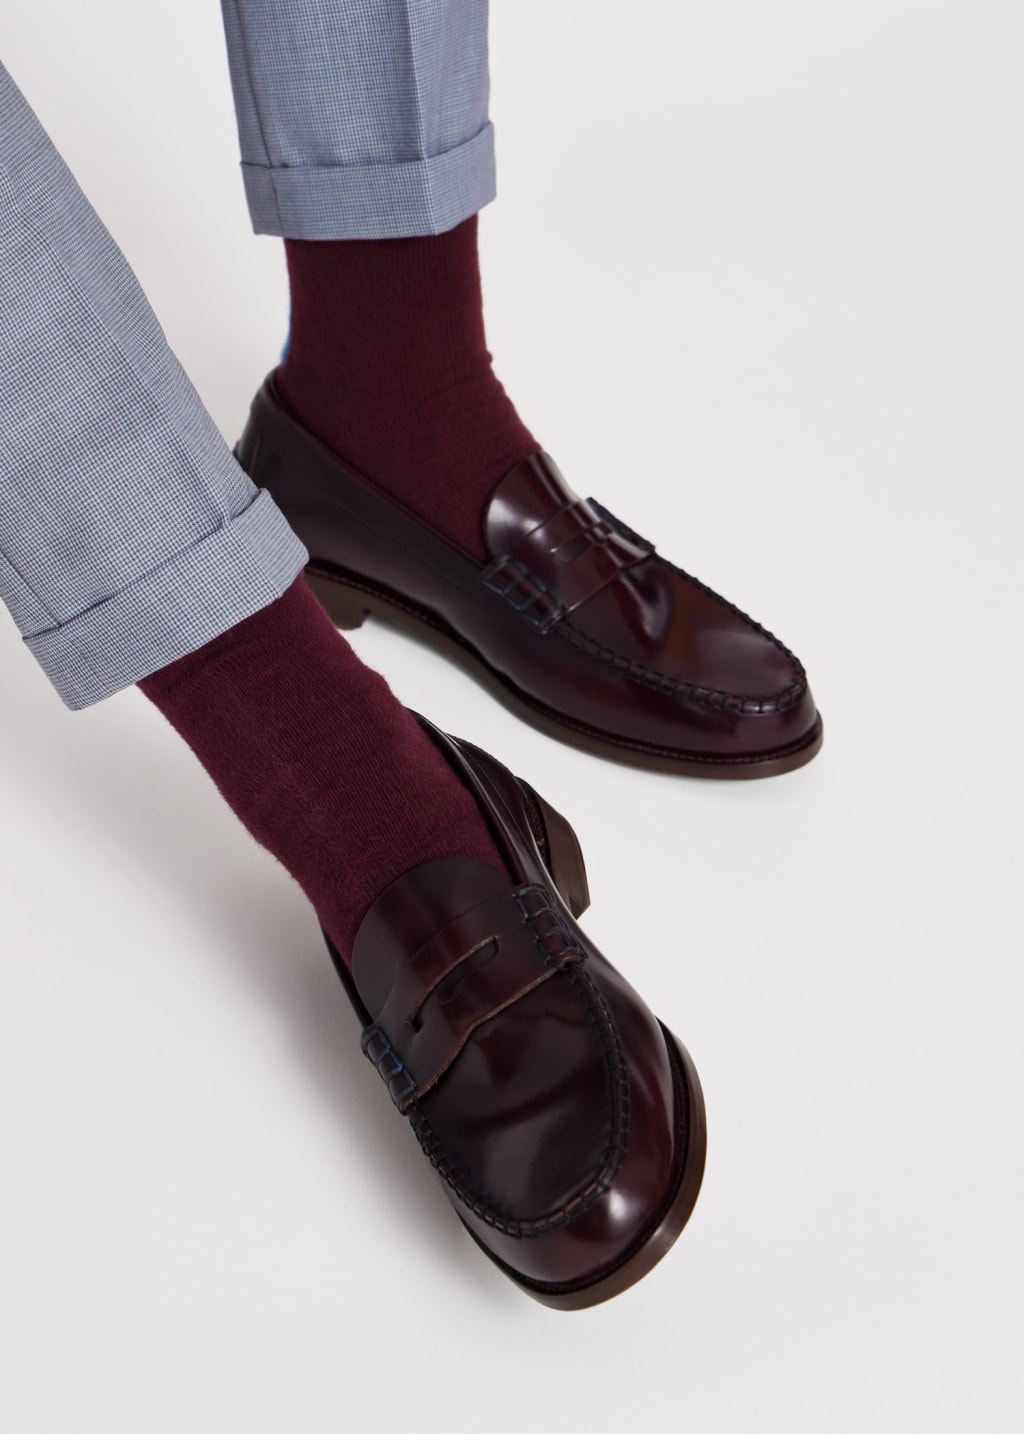 Model View - Bordeaux High-Shine Leather 'Lido' Loafers Paul Smith